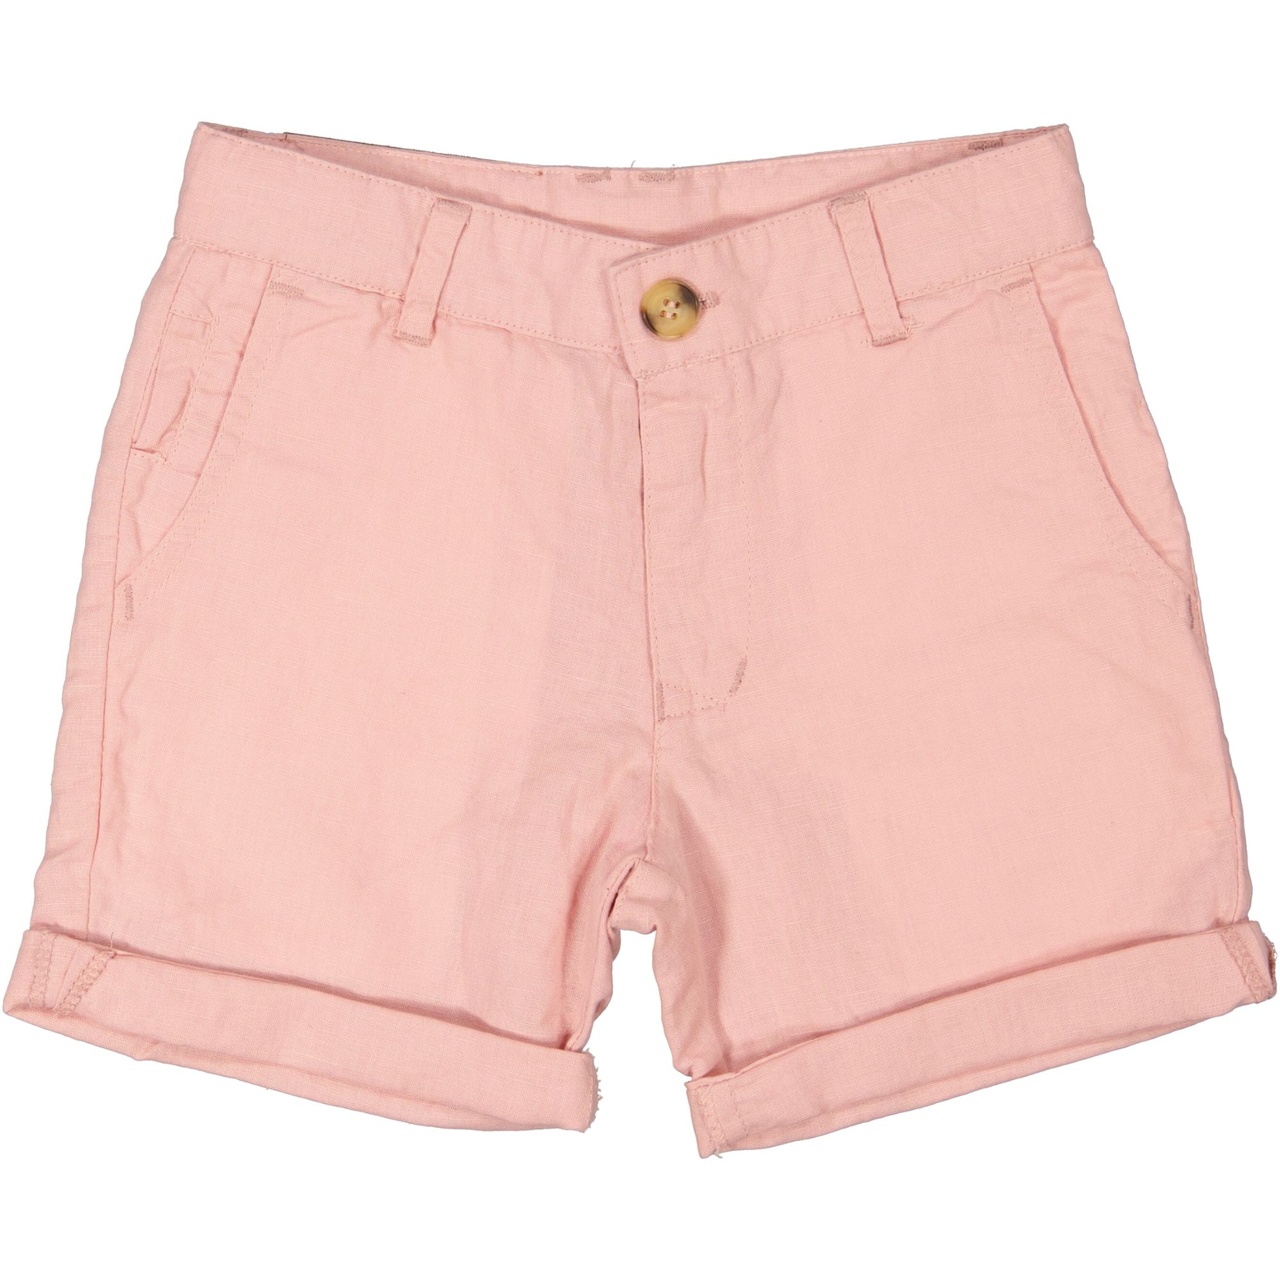 Linnen shorts Old pink 74/80